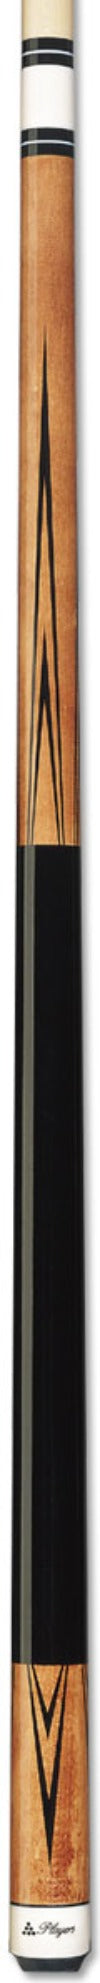 Players C-802 Pool Cue